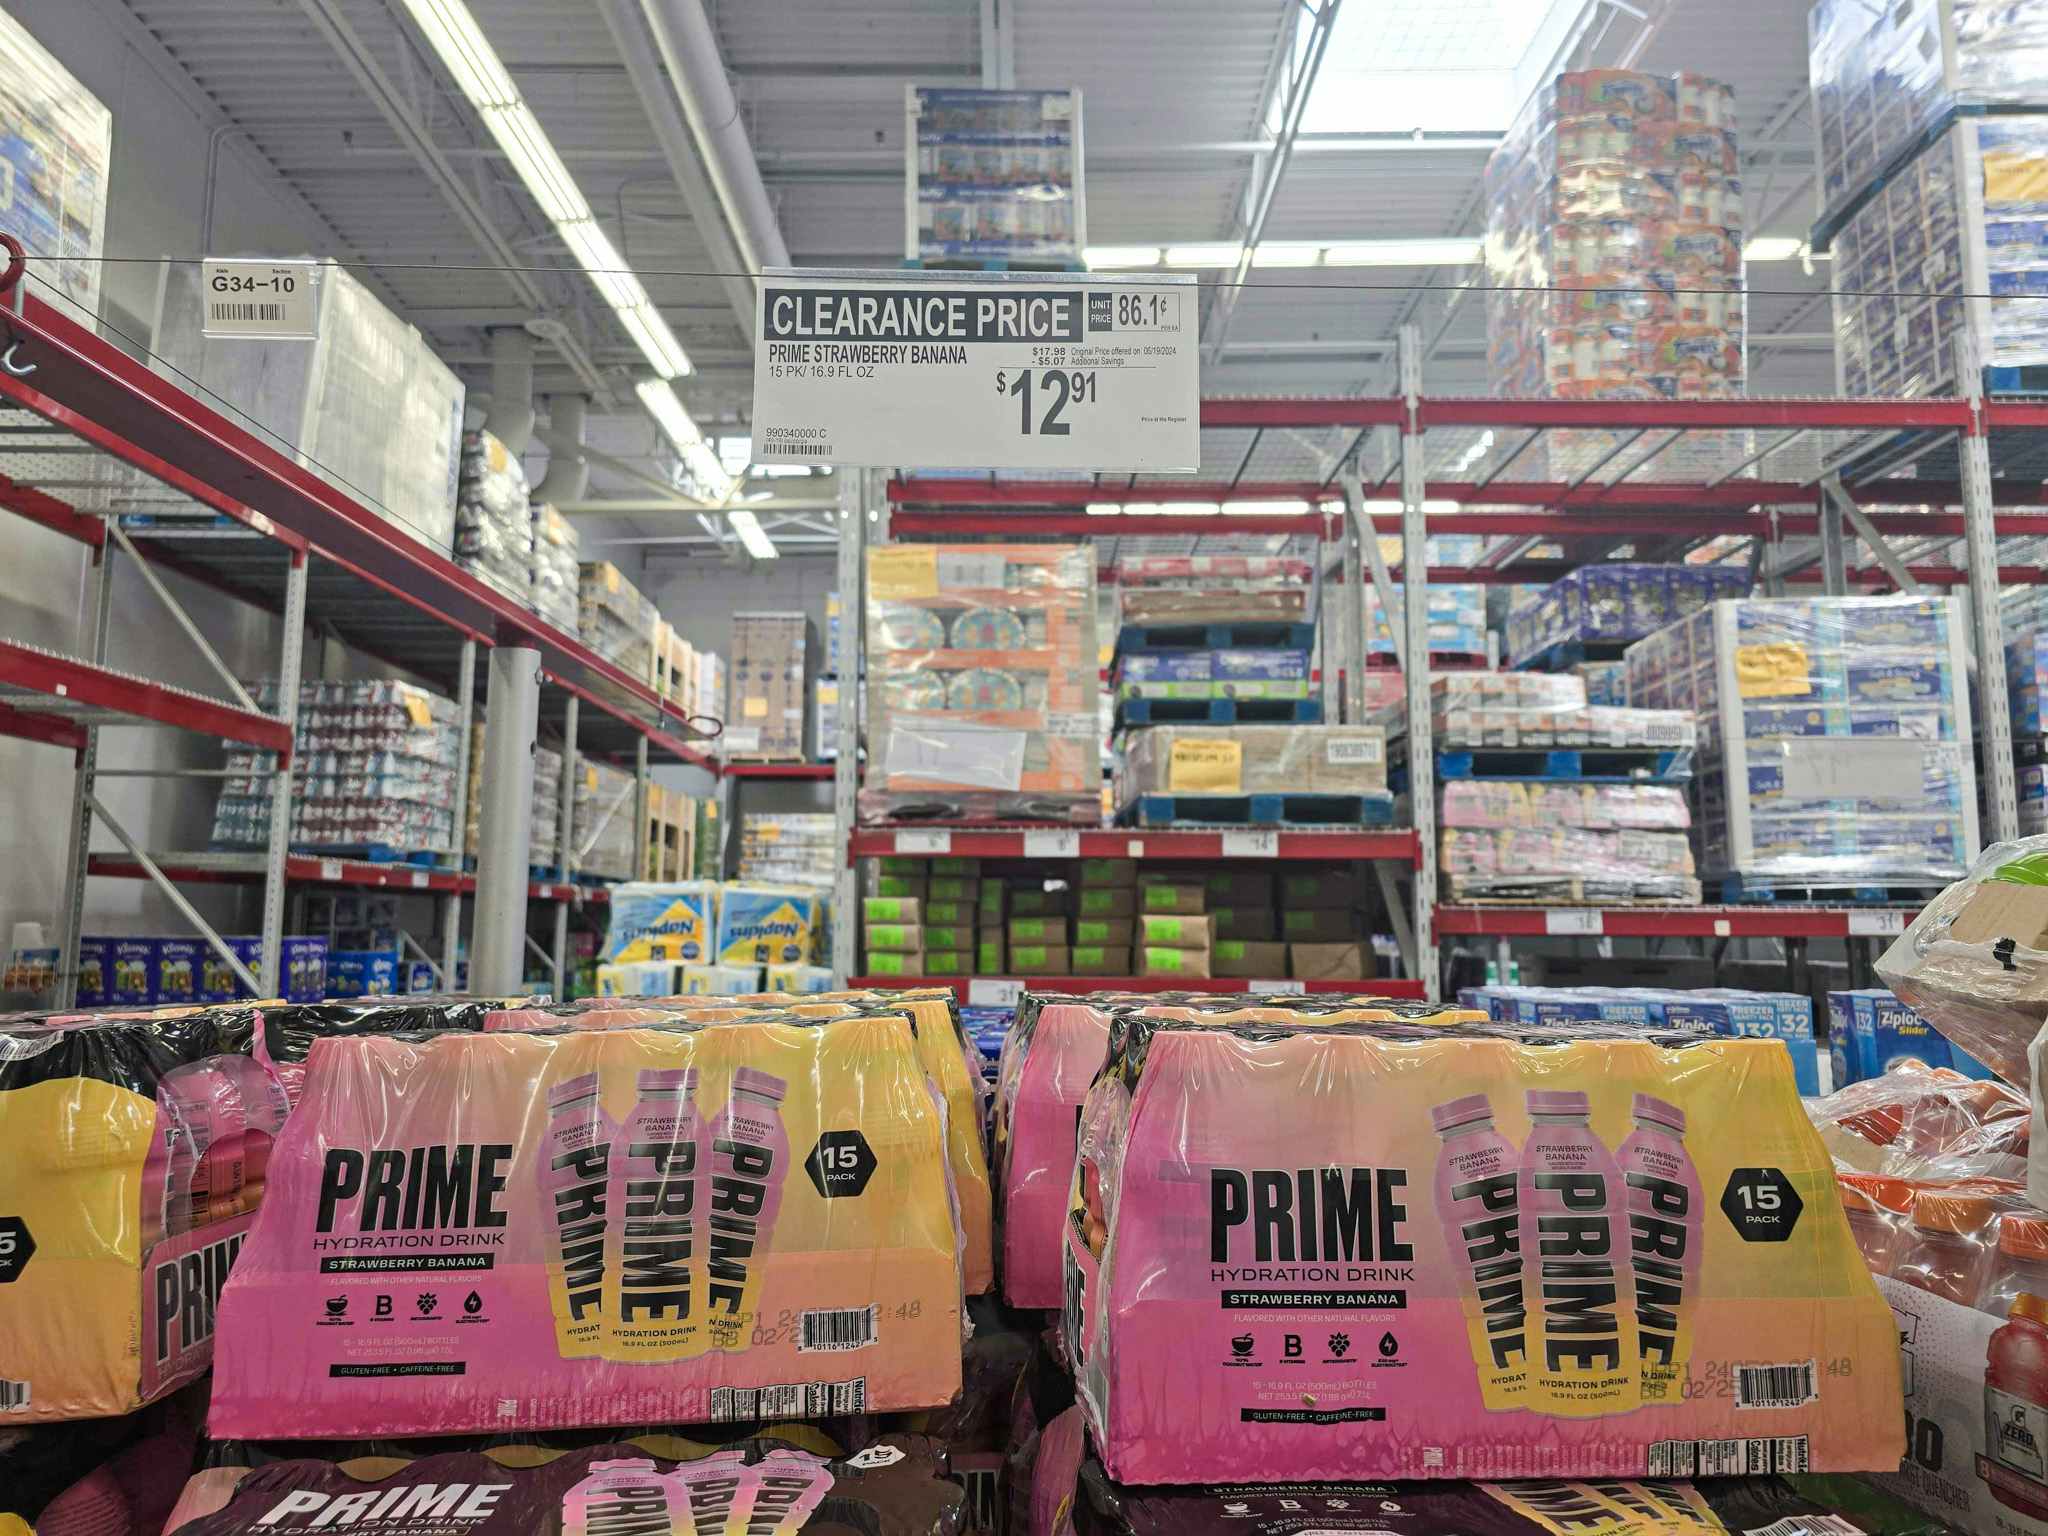 prime hydration drinks with a clearance sign for $12.91